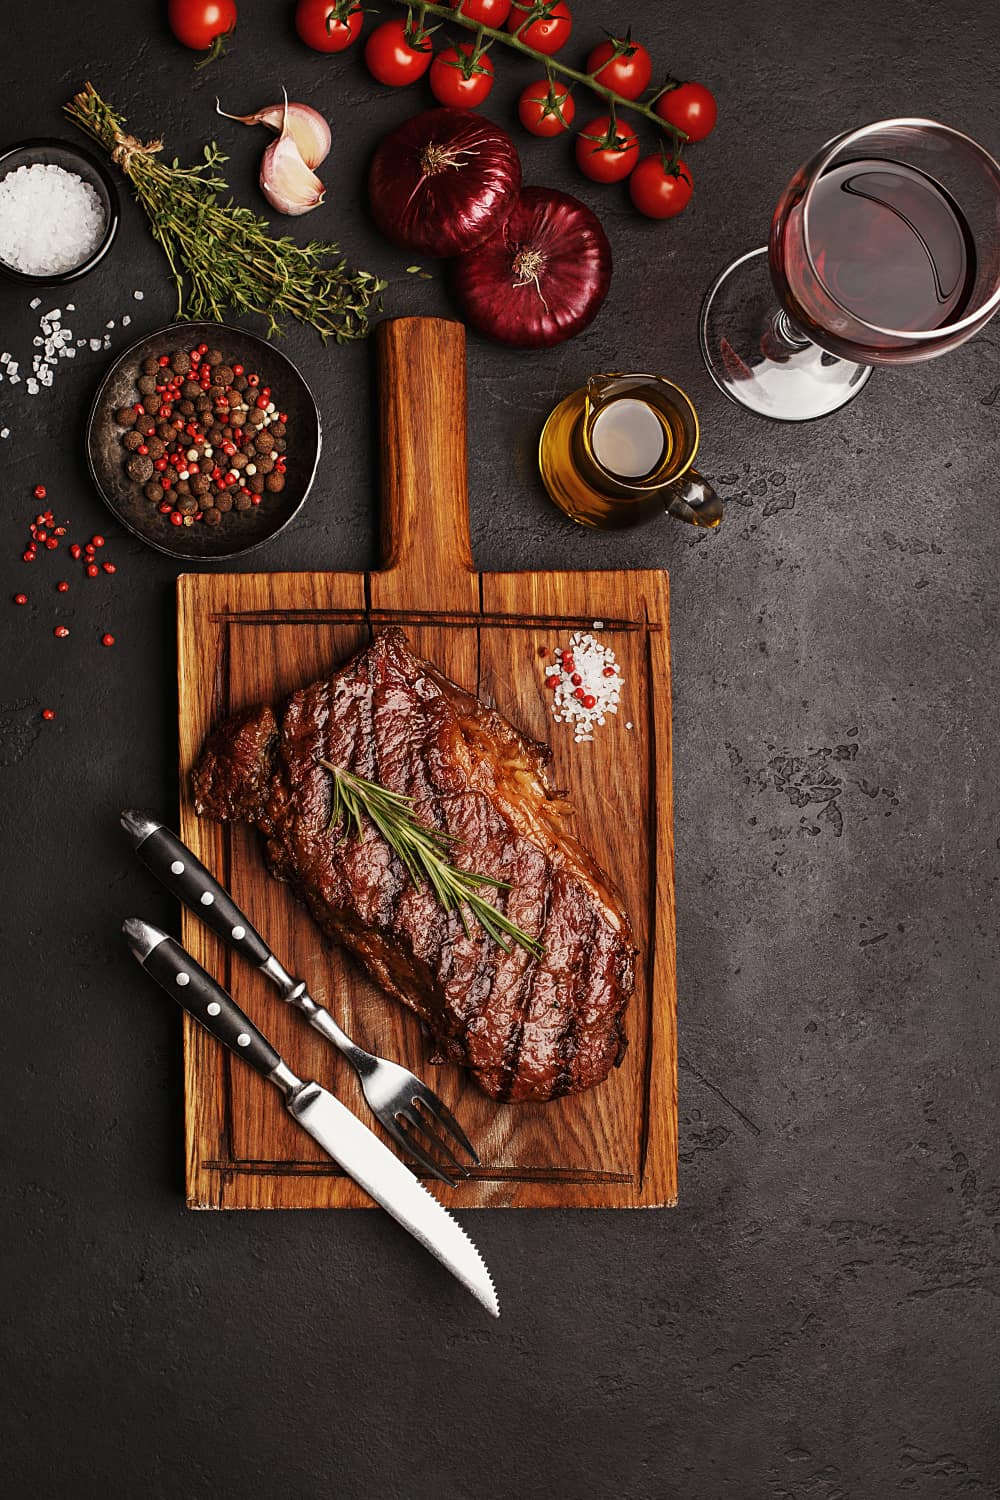 Striploin beef steak on wooden board with glass of wine, vegetables, herbs and spices on dark stone background